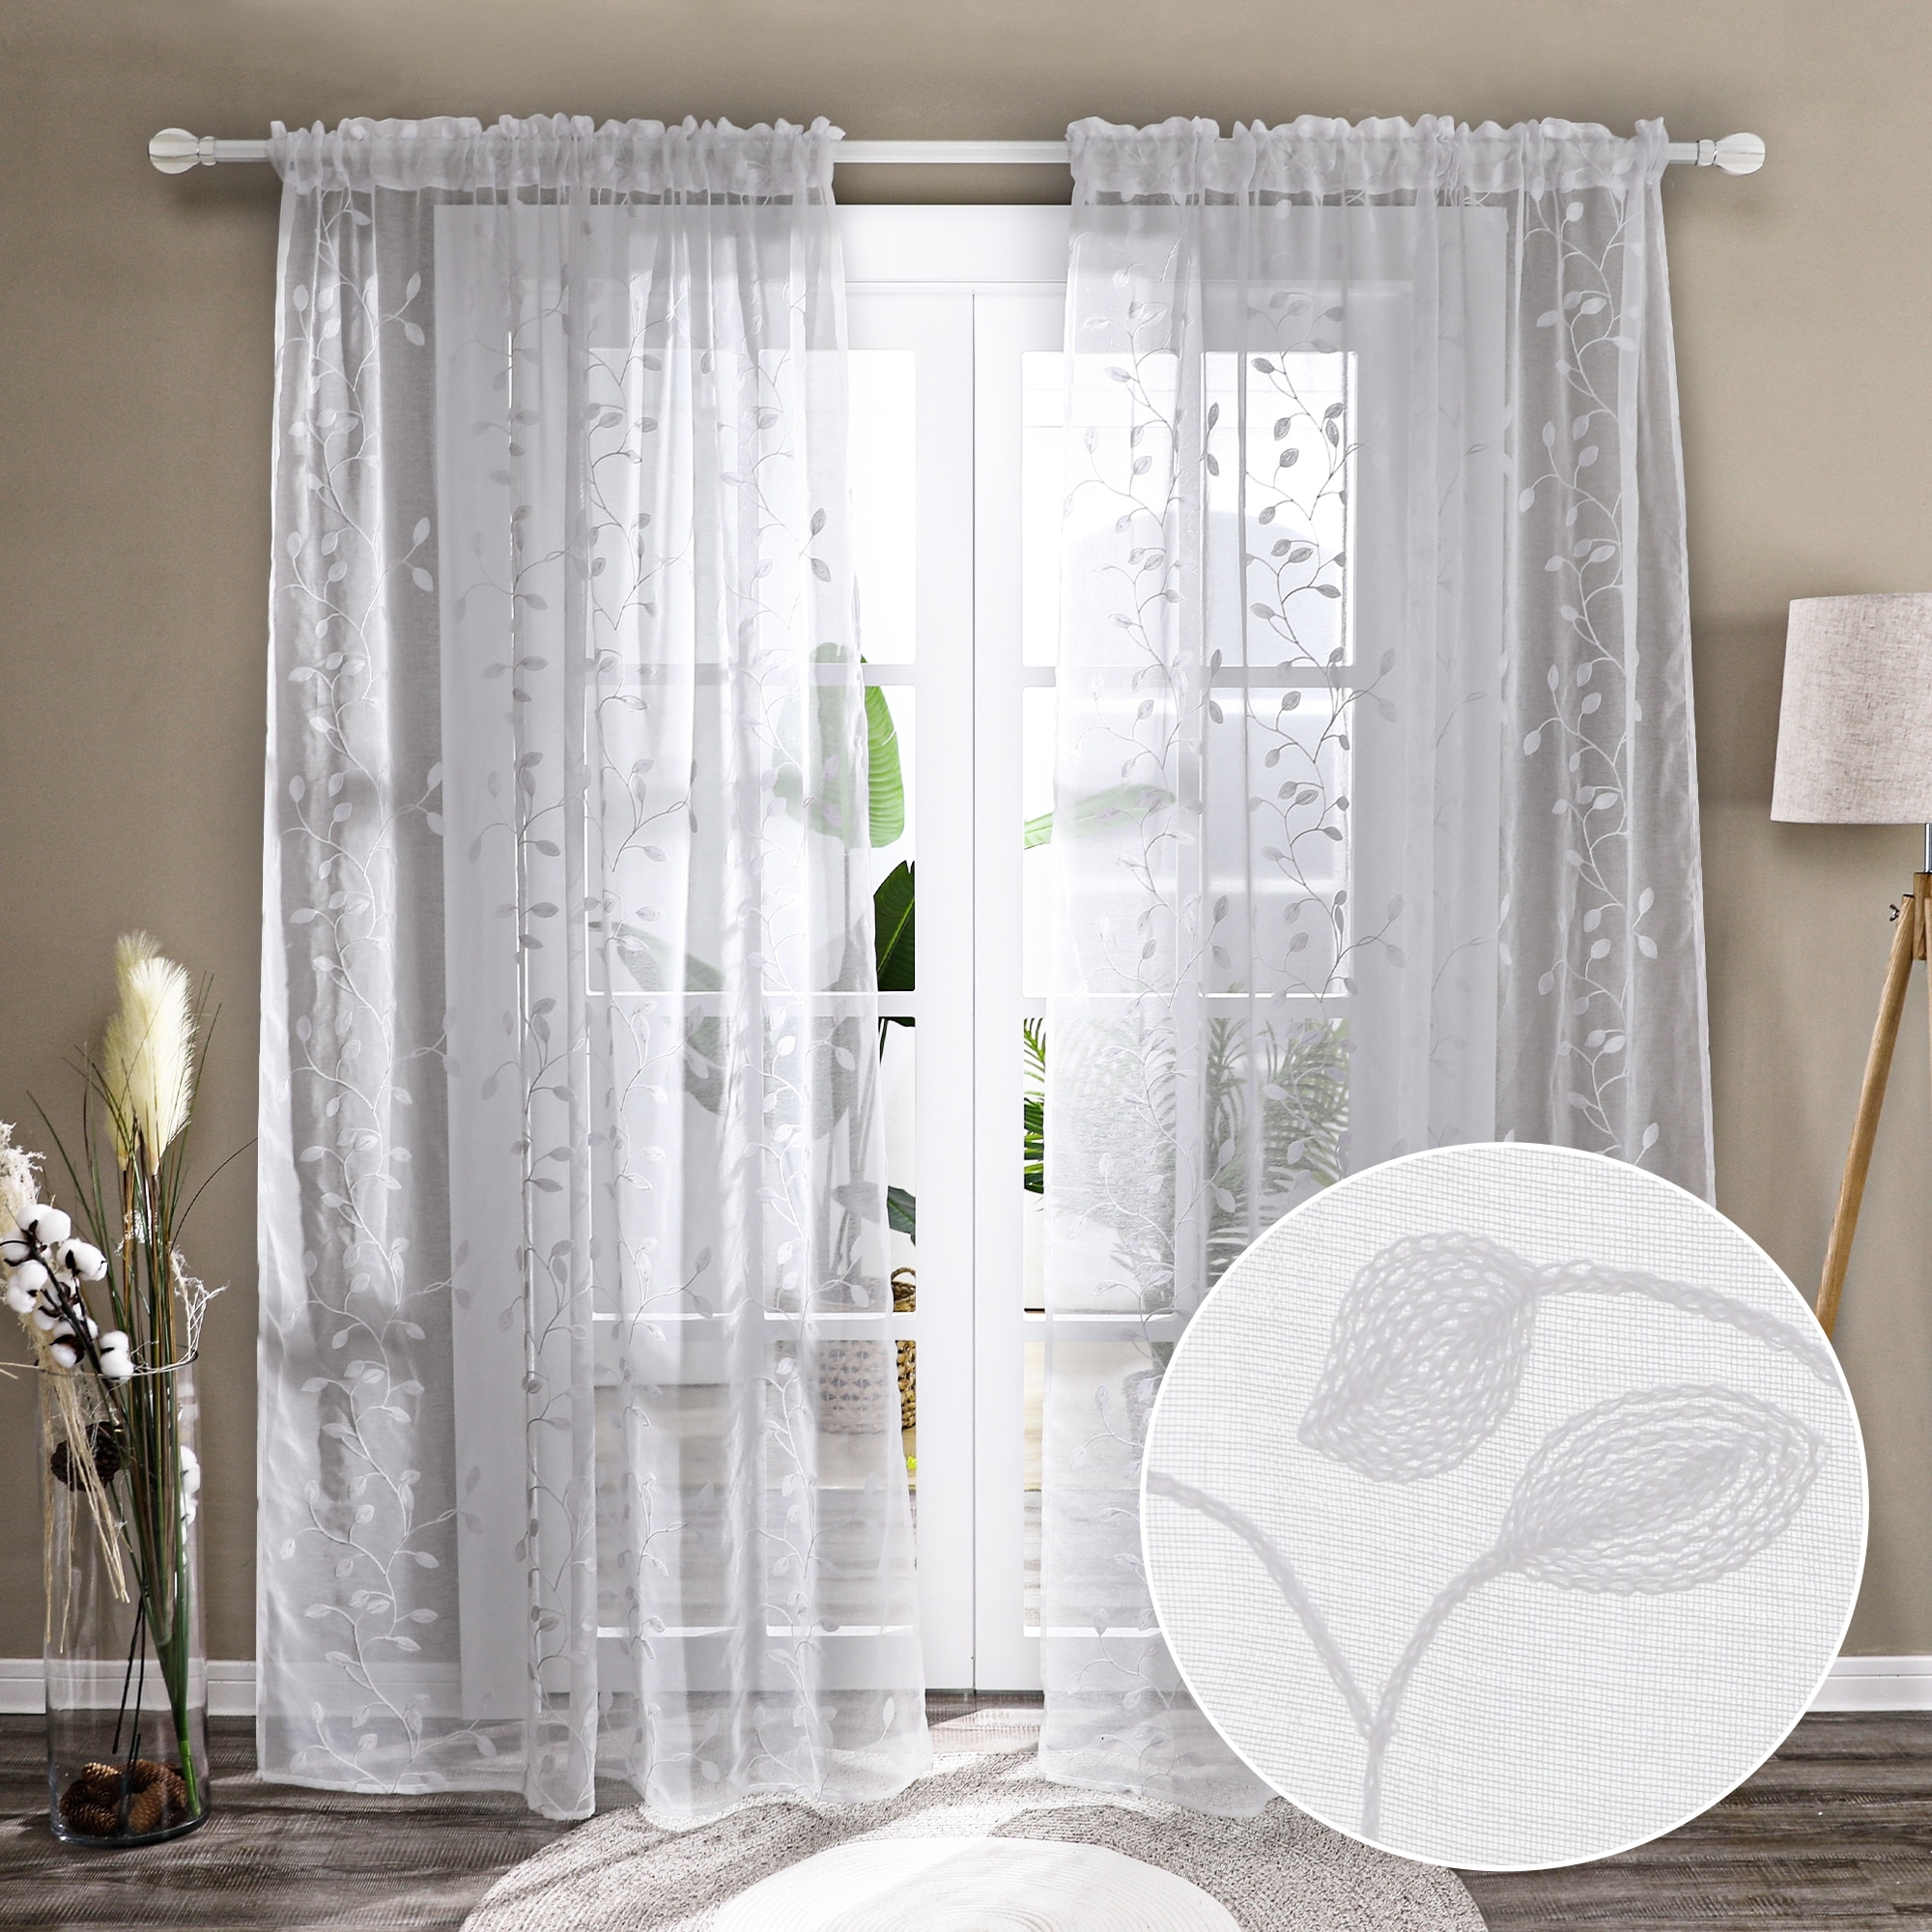 MIULEE Decorative Sheer Curtains with Embroidered Leaf Pattern for Liv